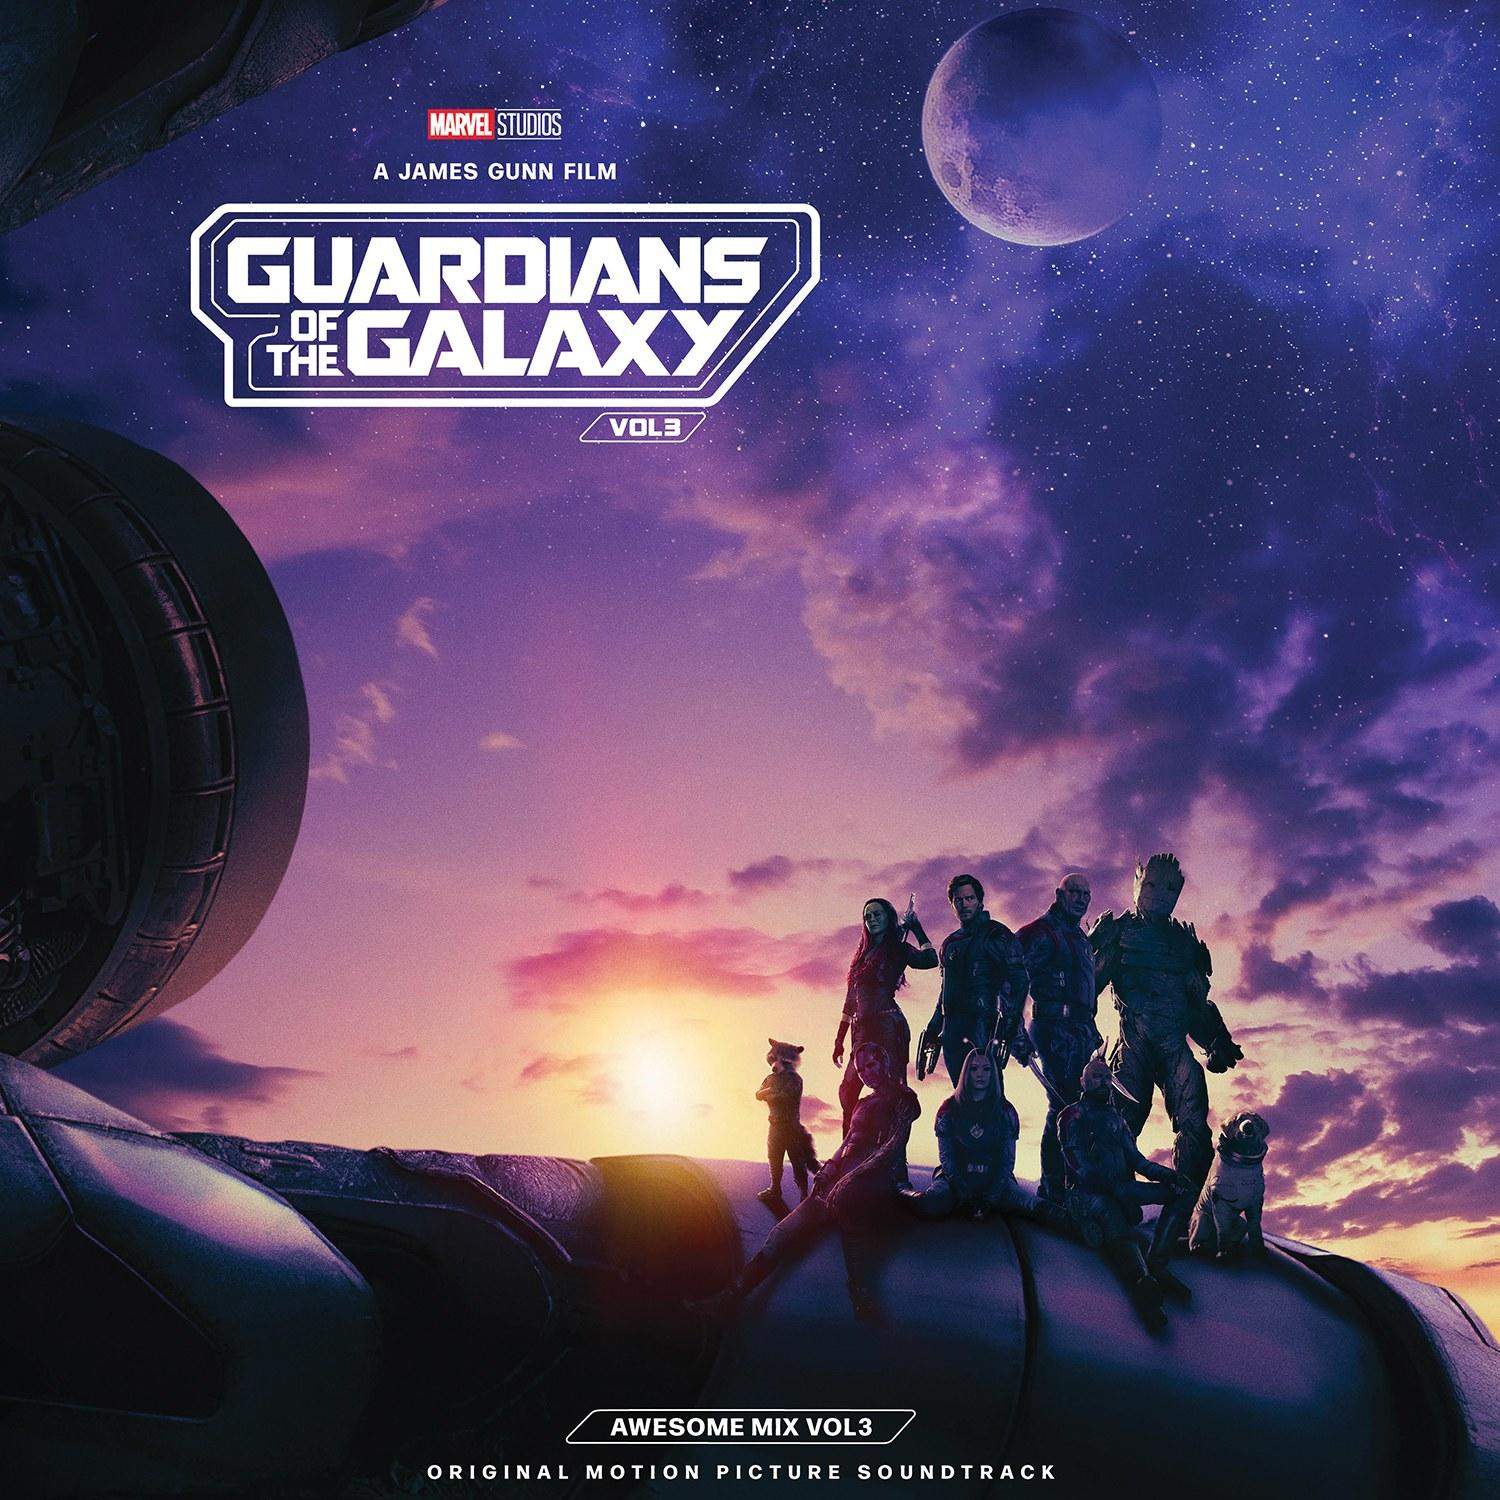 Various - Guardians 3 Exklusive Edition Blue Mix (Vinyl) Galaxy - Of + Vol. Awesome 3: Poster Vol. (2LP) The